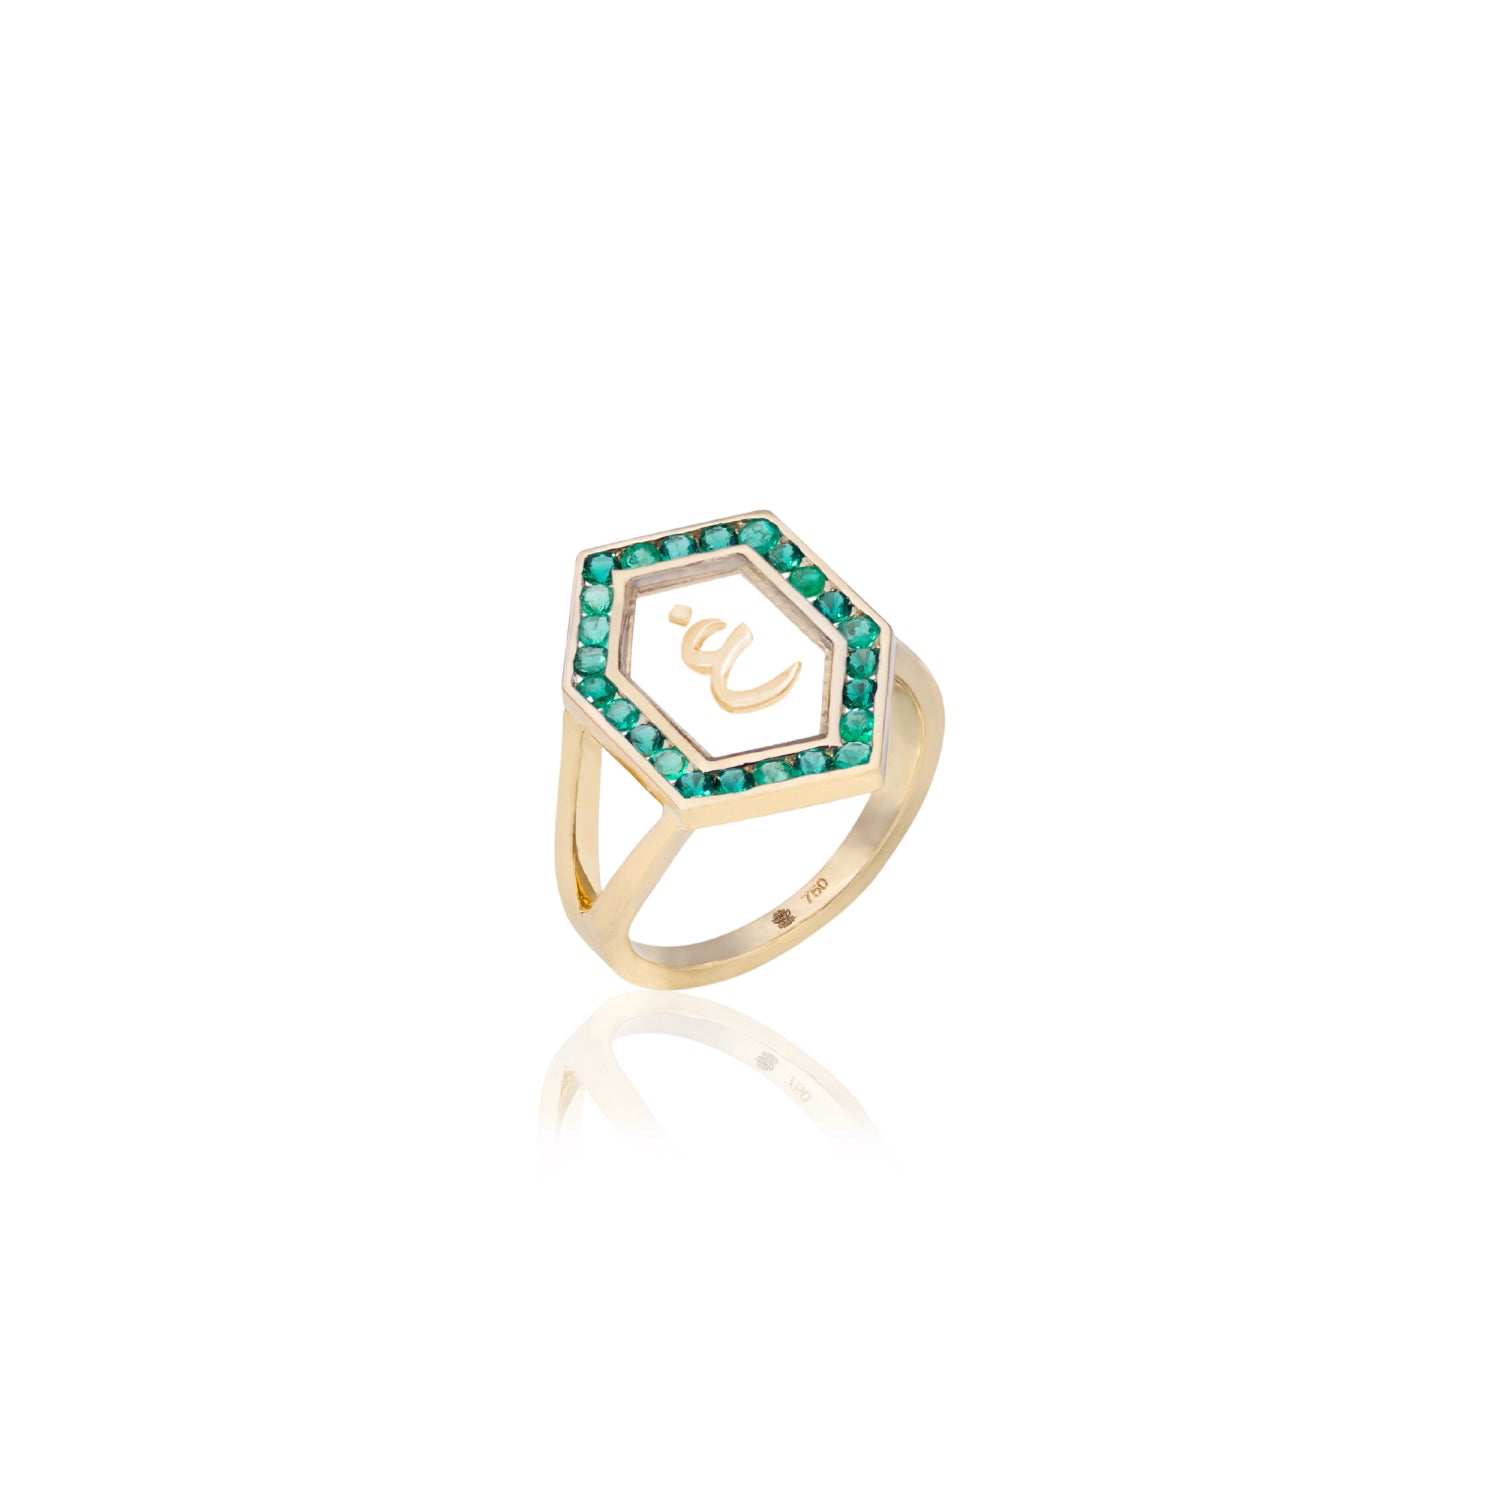 Qamoos 1.0 Letter غ Emerald Ring in Yellow Gold